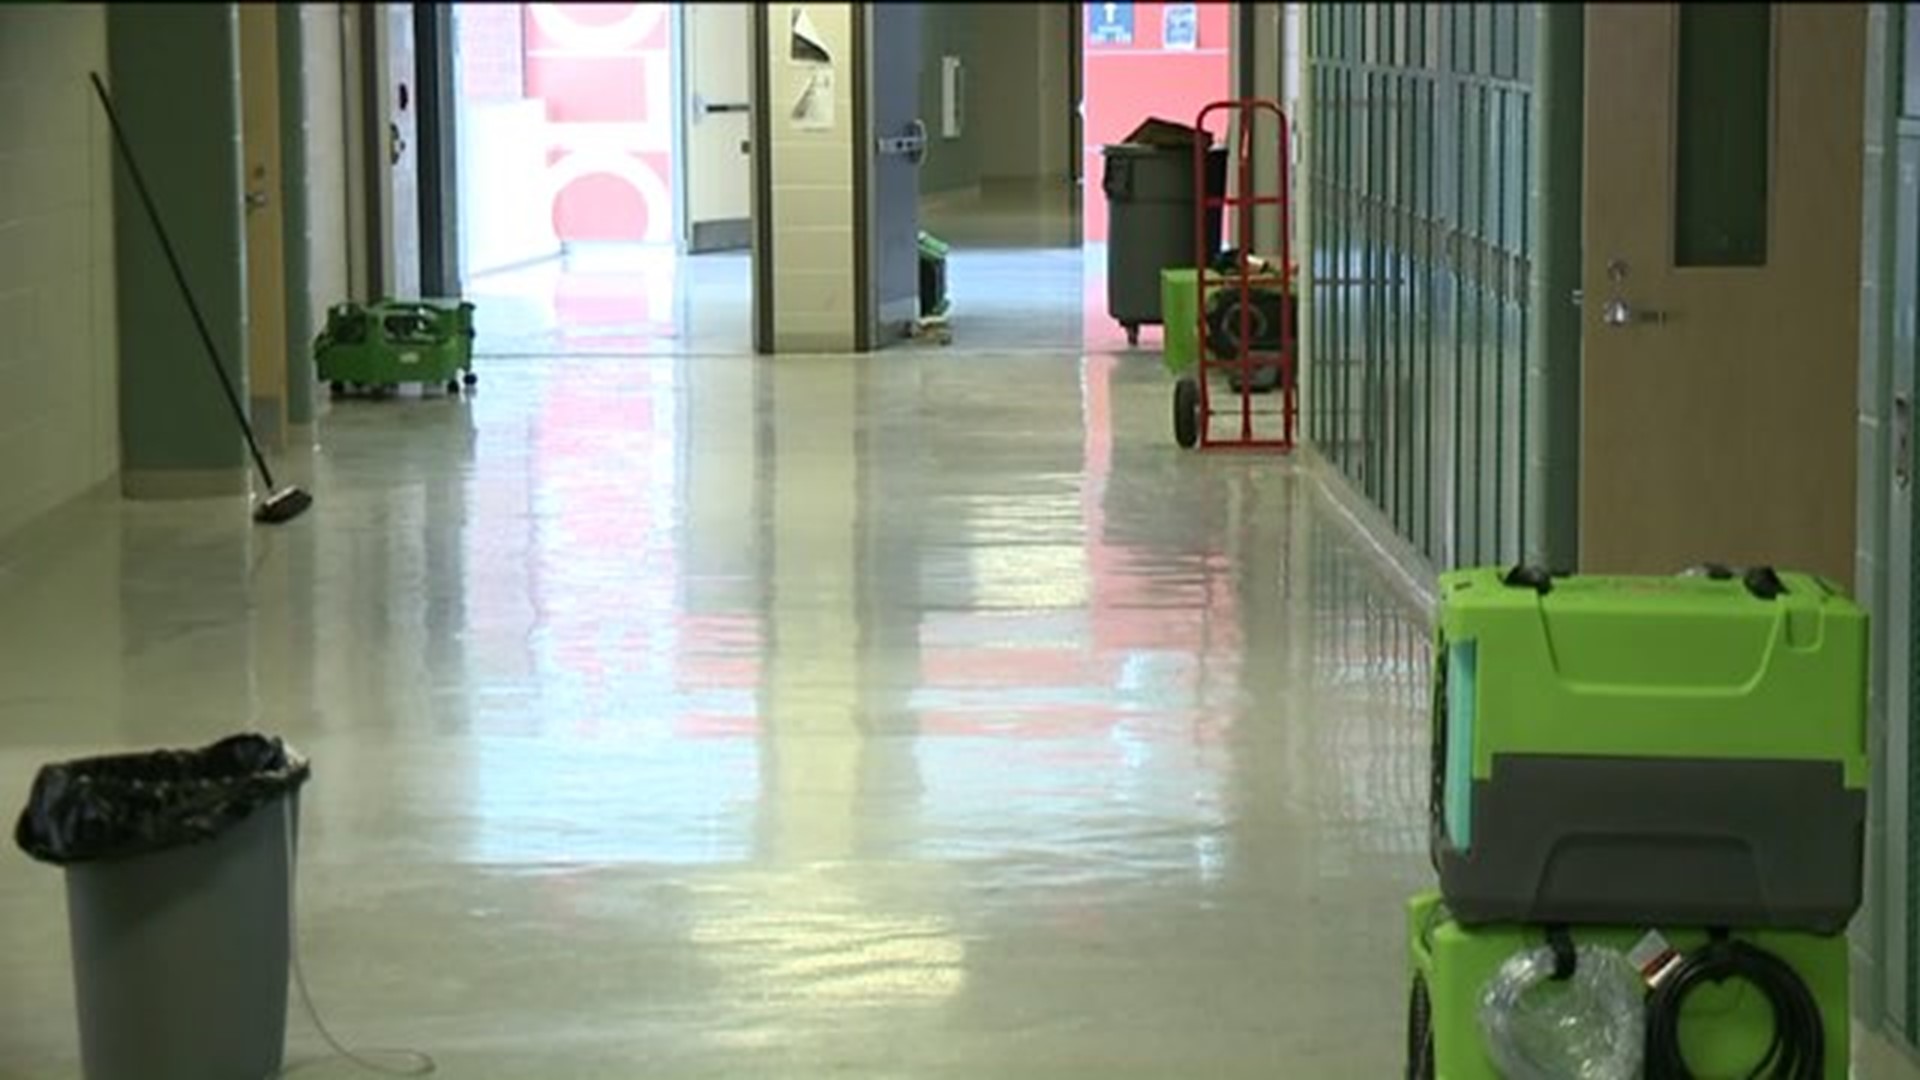 Dallas High School Will Open Monday After Broken Pipe, Flooding